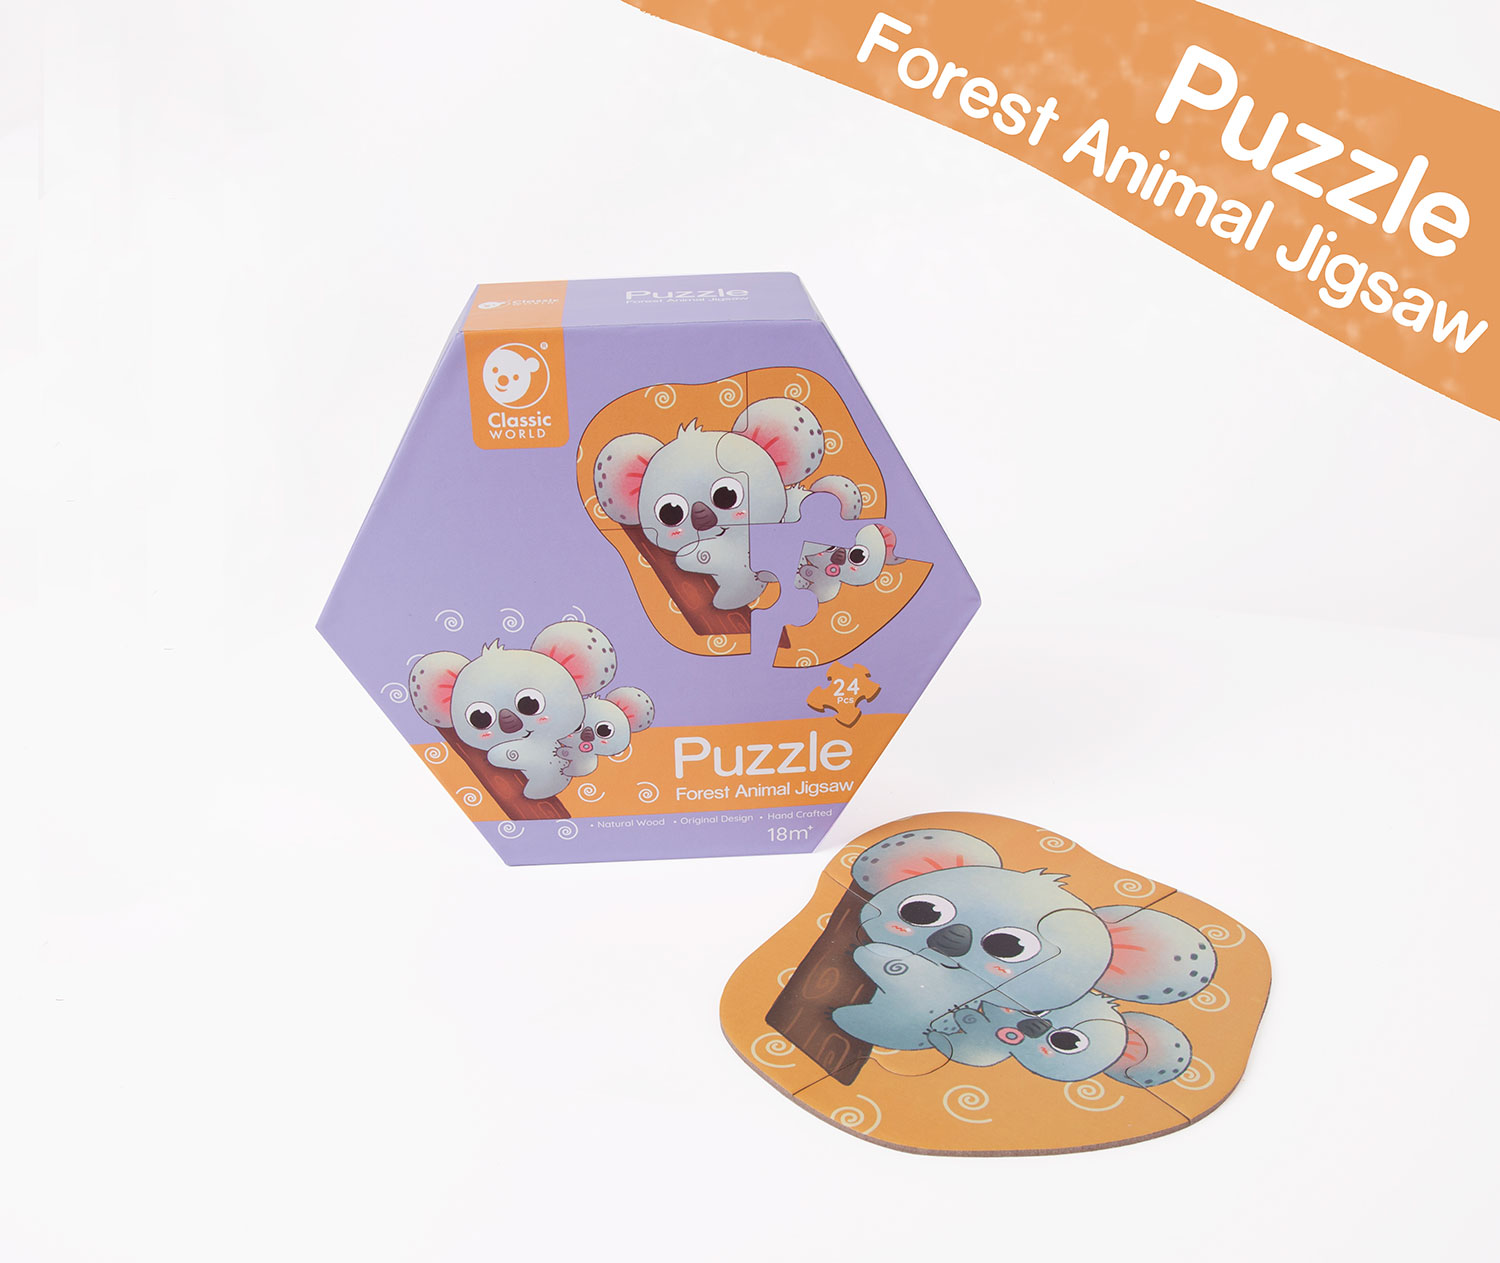 Forest Animal Jigsaw Puzzle